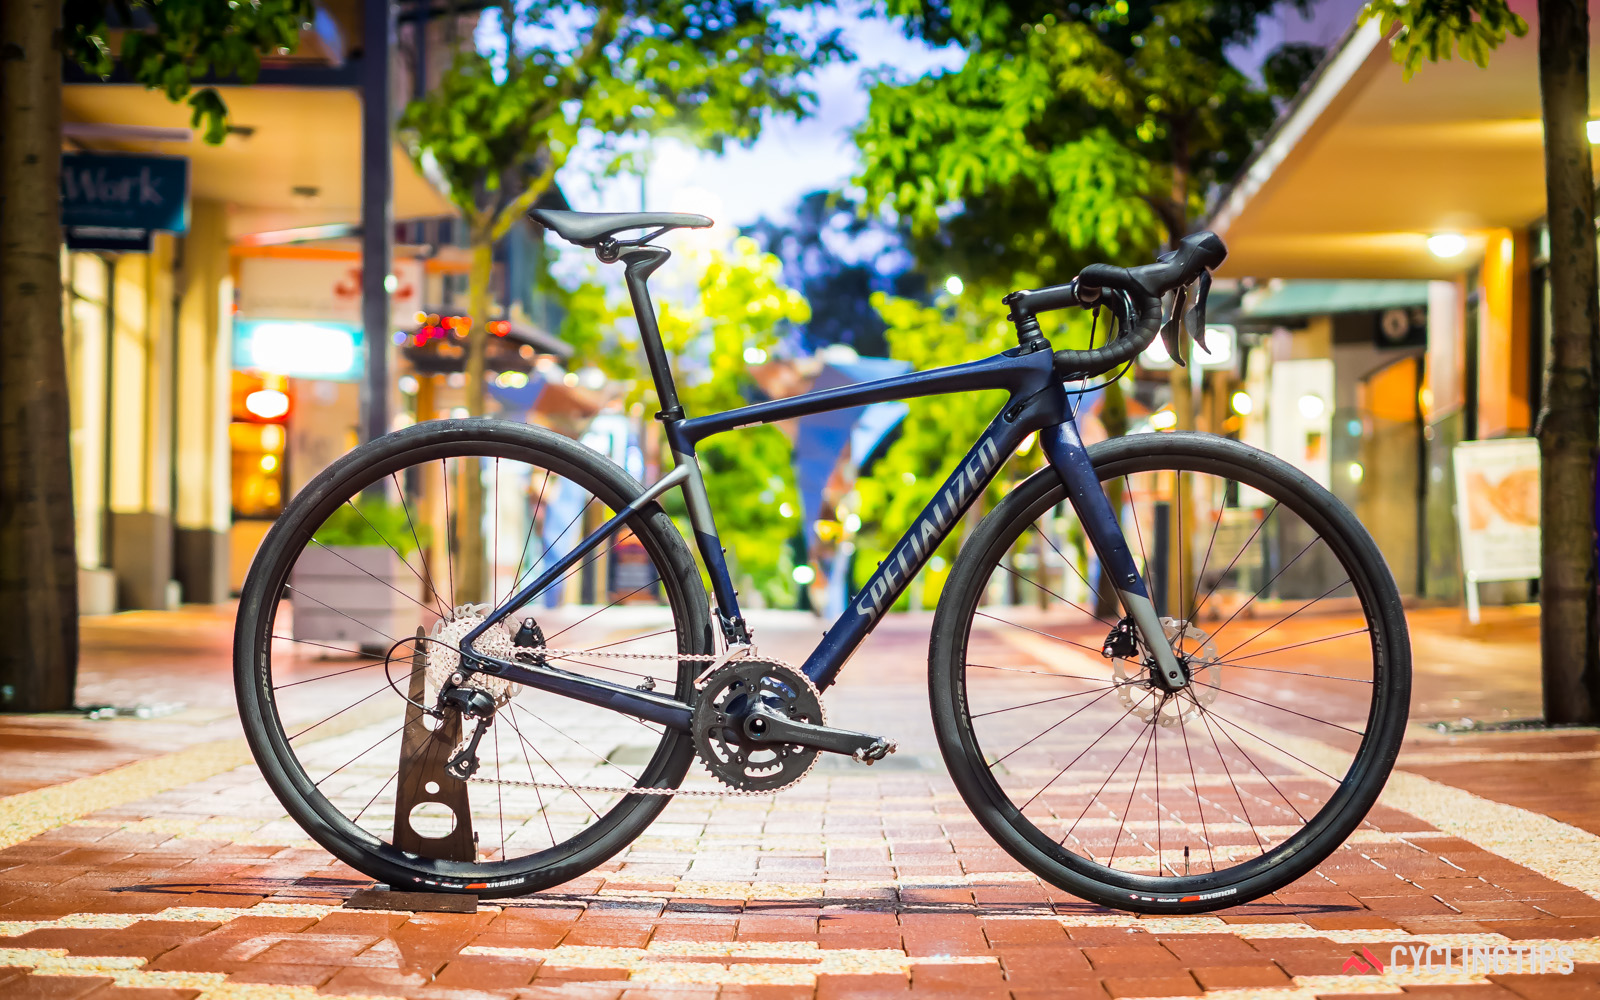 Specialized diverge. Specialized Diverge Gravel Bike. Specialized Diverge 2018. Велосипеды specialized гревел. Specialized Gravel.